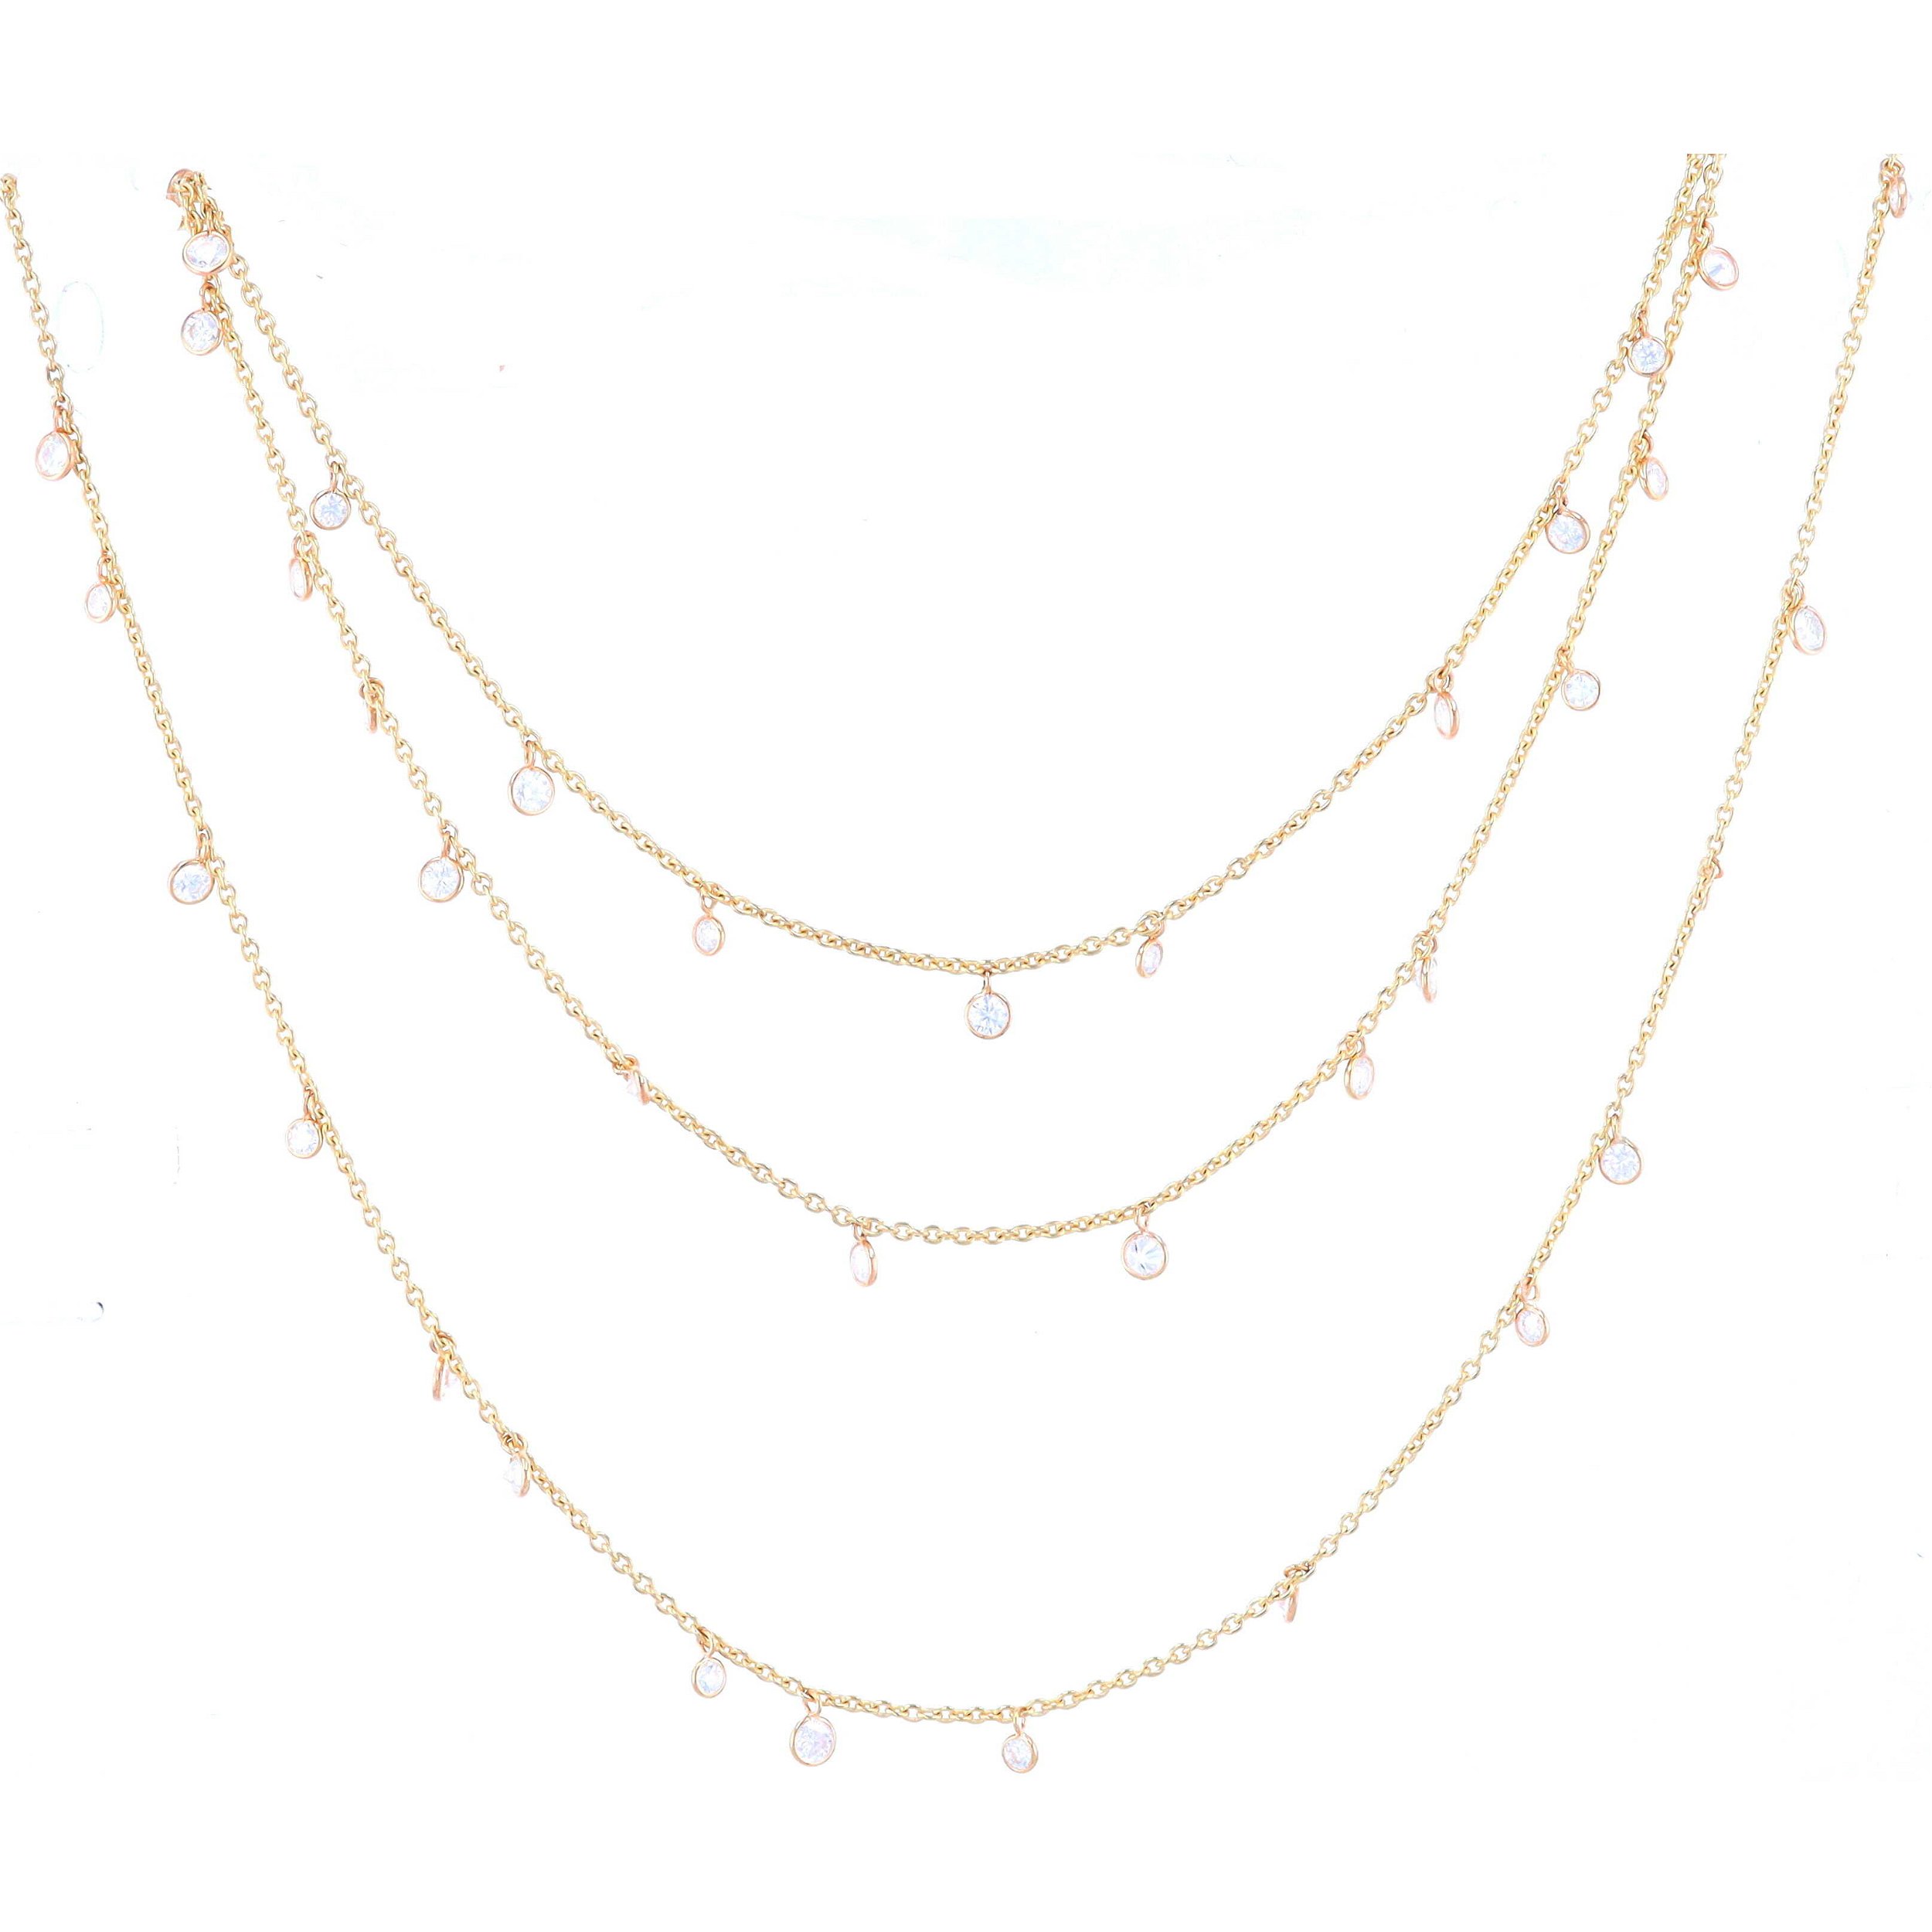 14K Yellow Gold 38.5" Dangling Diamond Stations Necklace